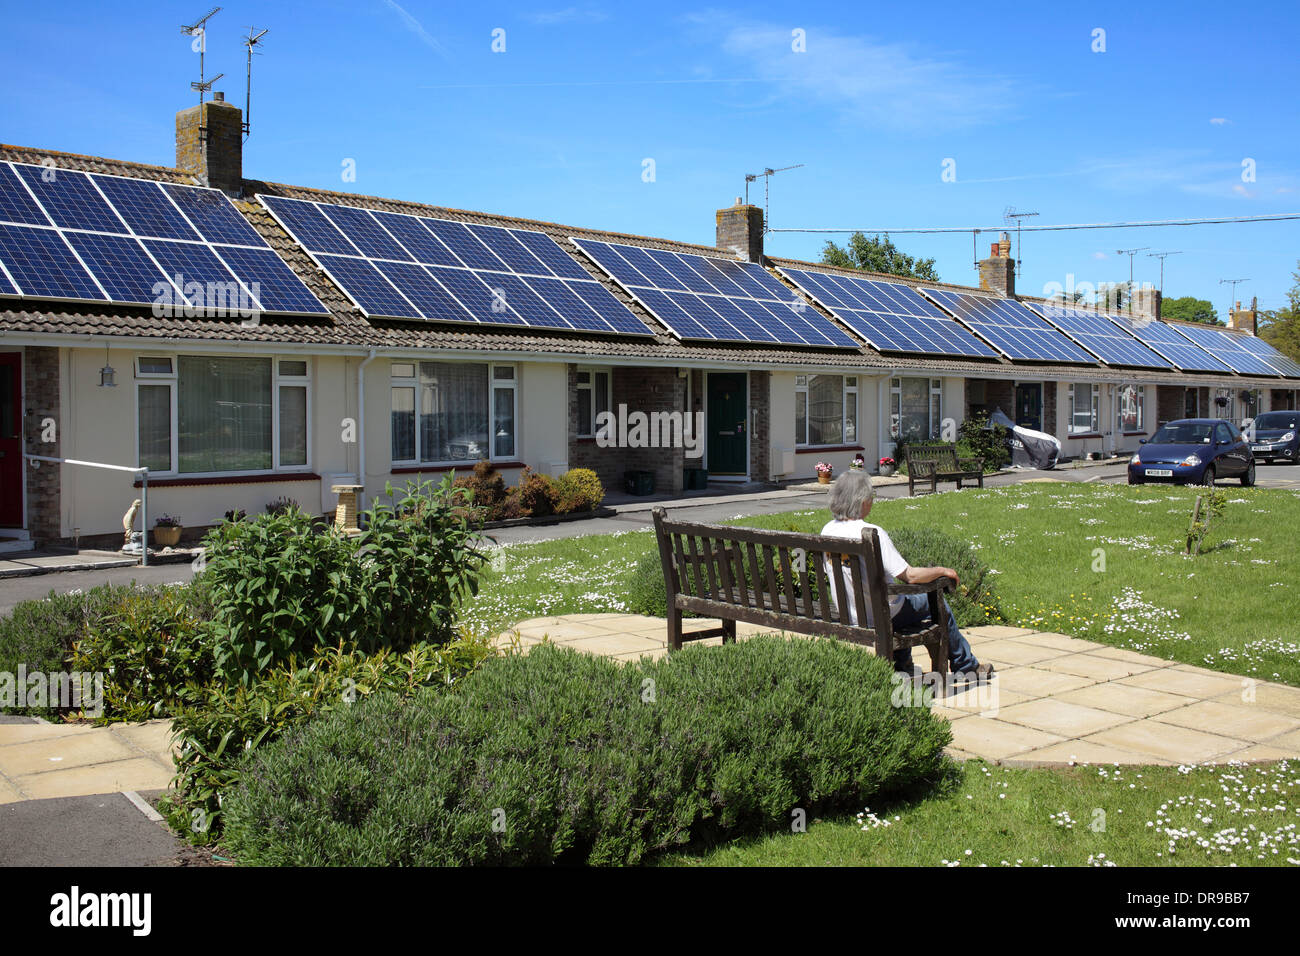 Photovoltaic cells on the roofs of a terrace of single storey social housing, Chestnut Close, Congresbury, Somerset. Stock Photo